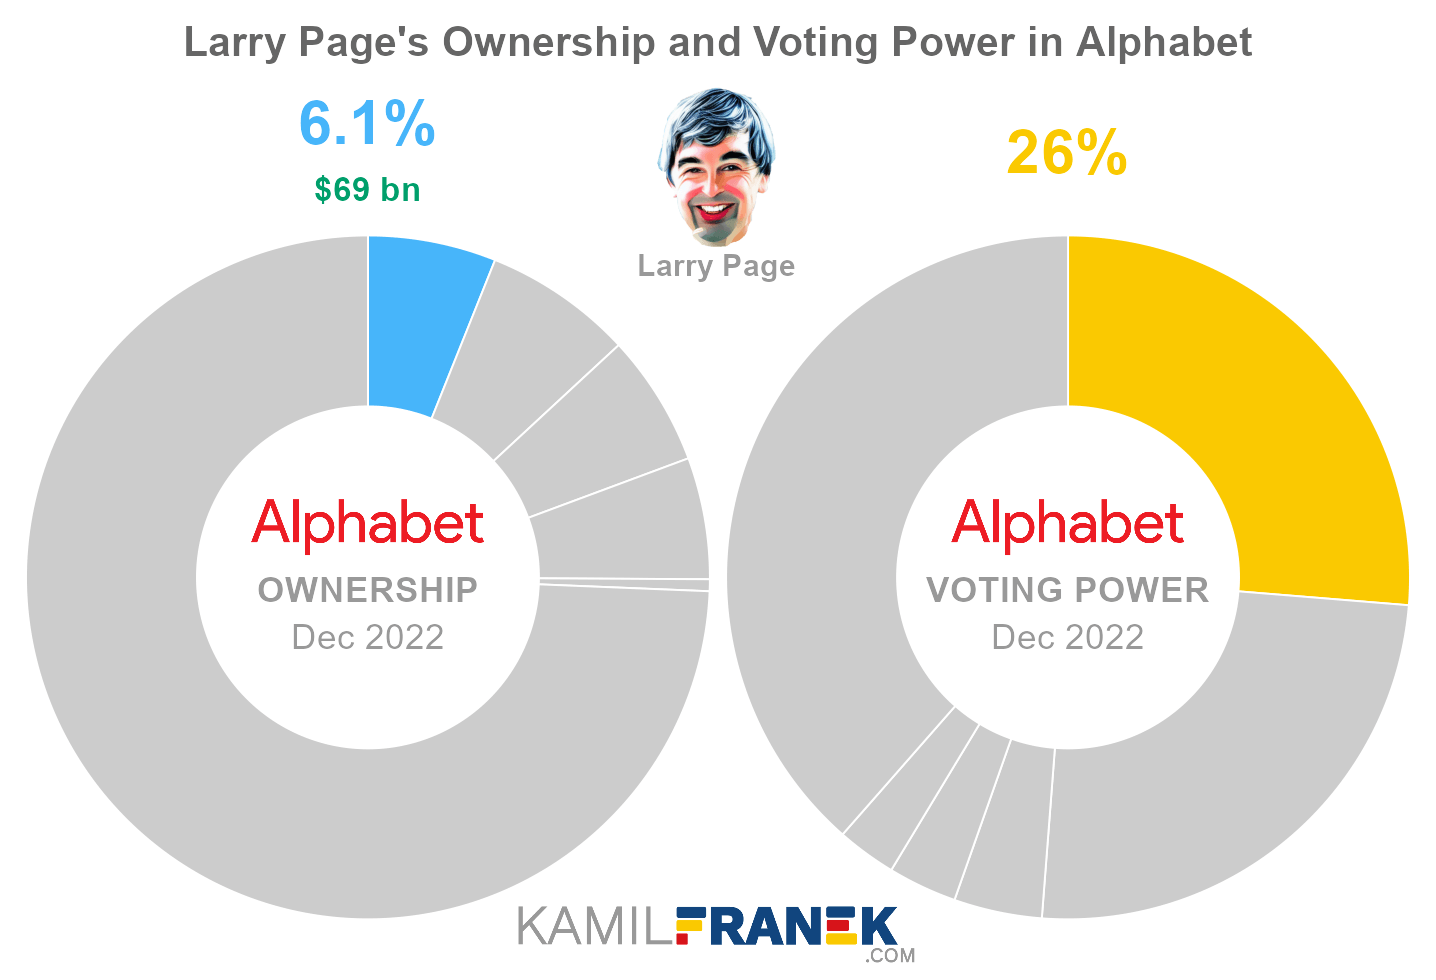 Larry Page's share ownership and voting power in Alphabet (chart)